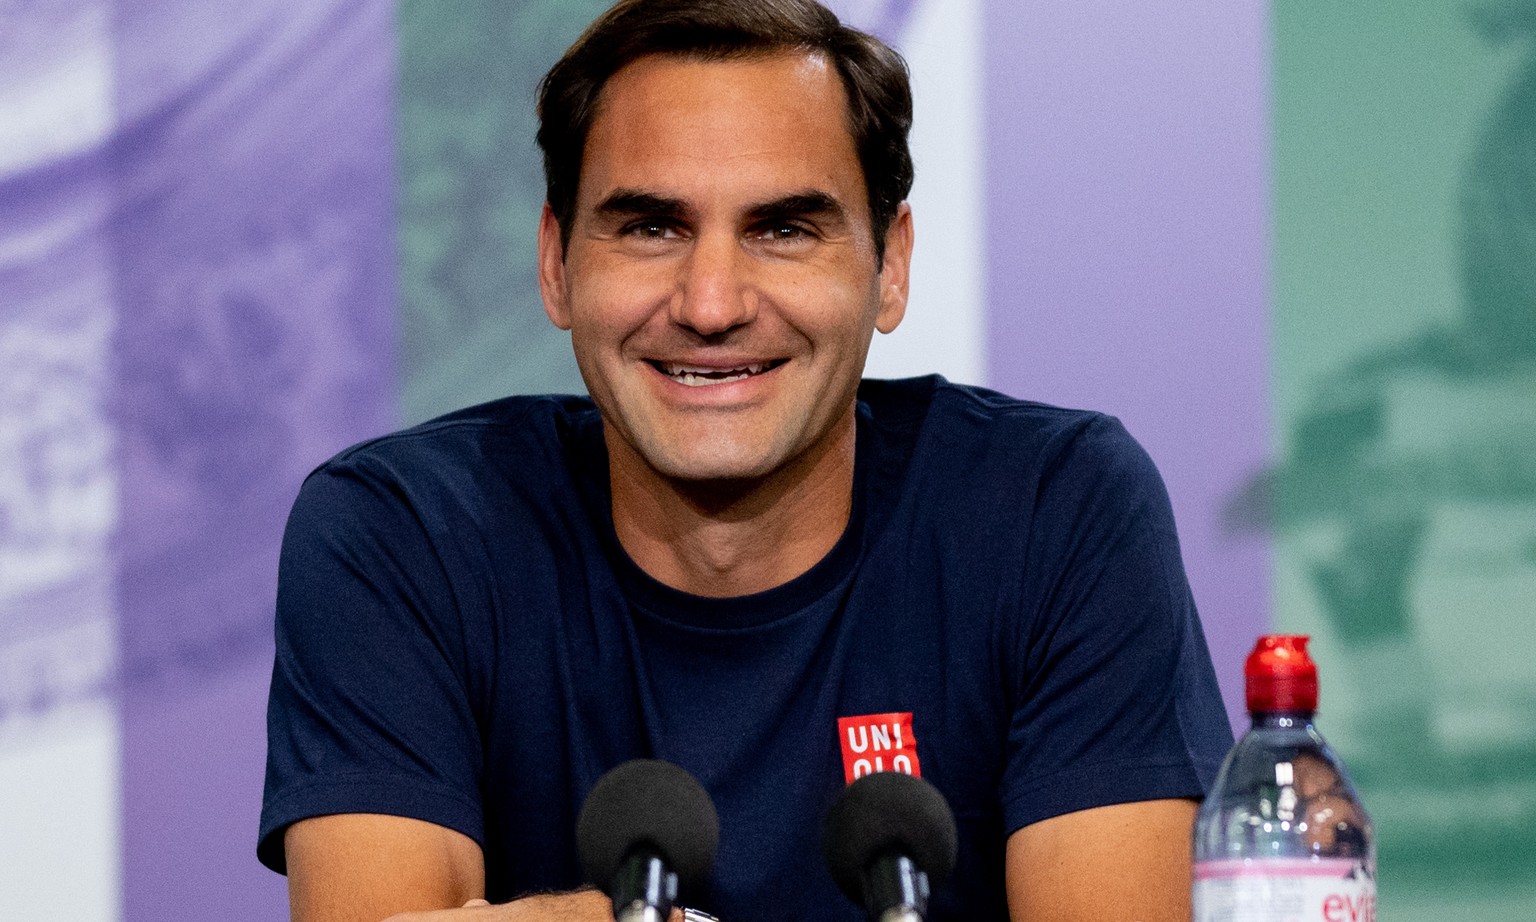 epa09302586 Swiss player Roger Federer attends a press conference in the main interview room ahead of the Wimbledon Championships held at The All England Lawn Tennis Club, Wimbledon, Britain, 26 June  ...